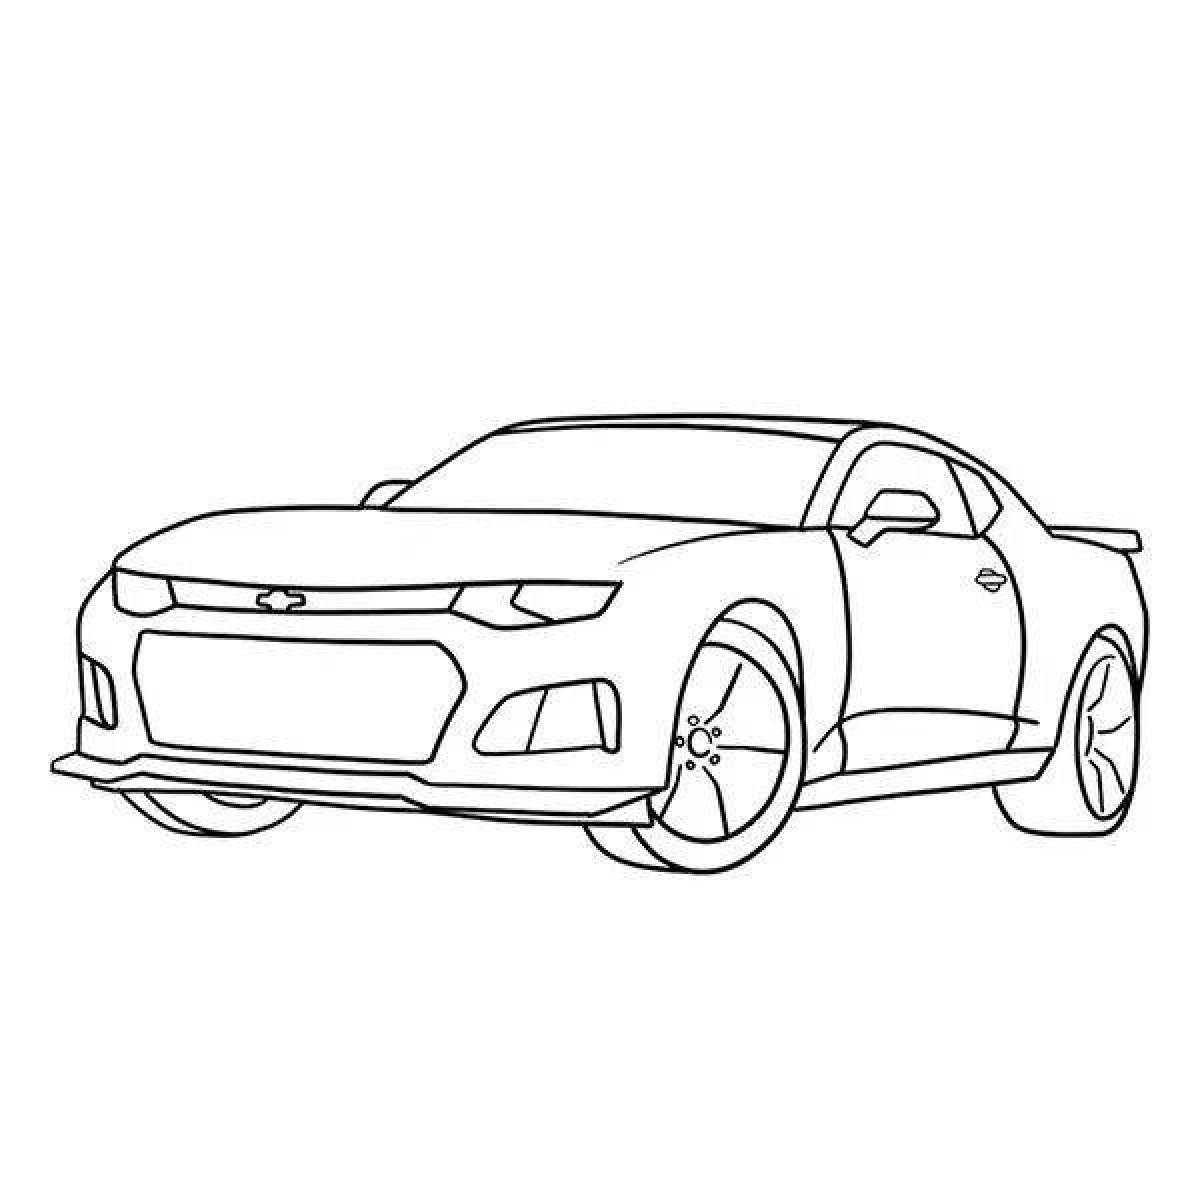 Chevrolet Camaro coloring page in vibrant colors